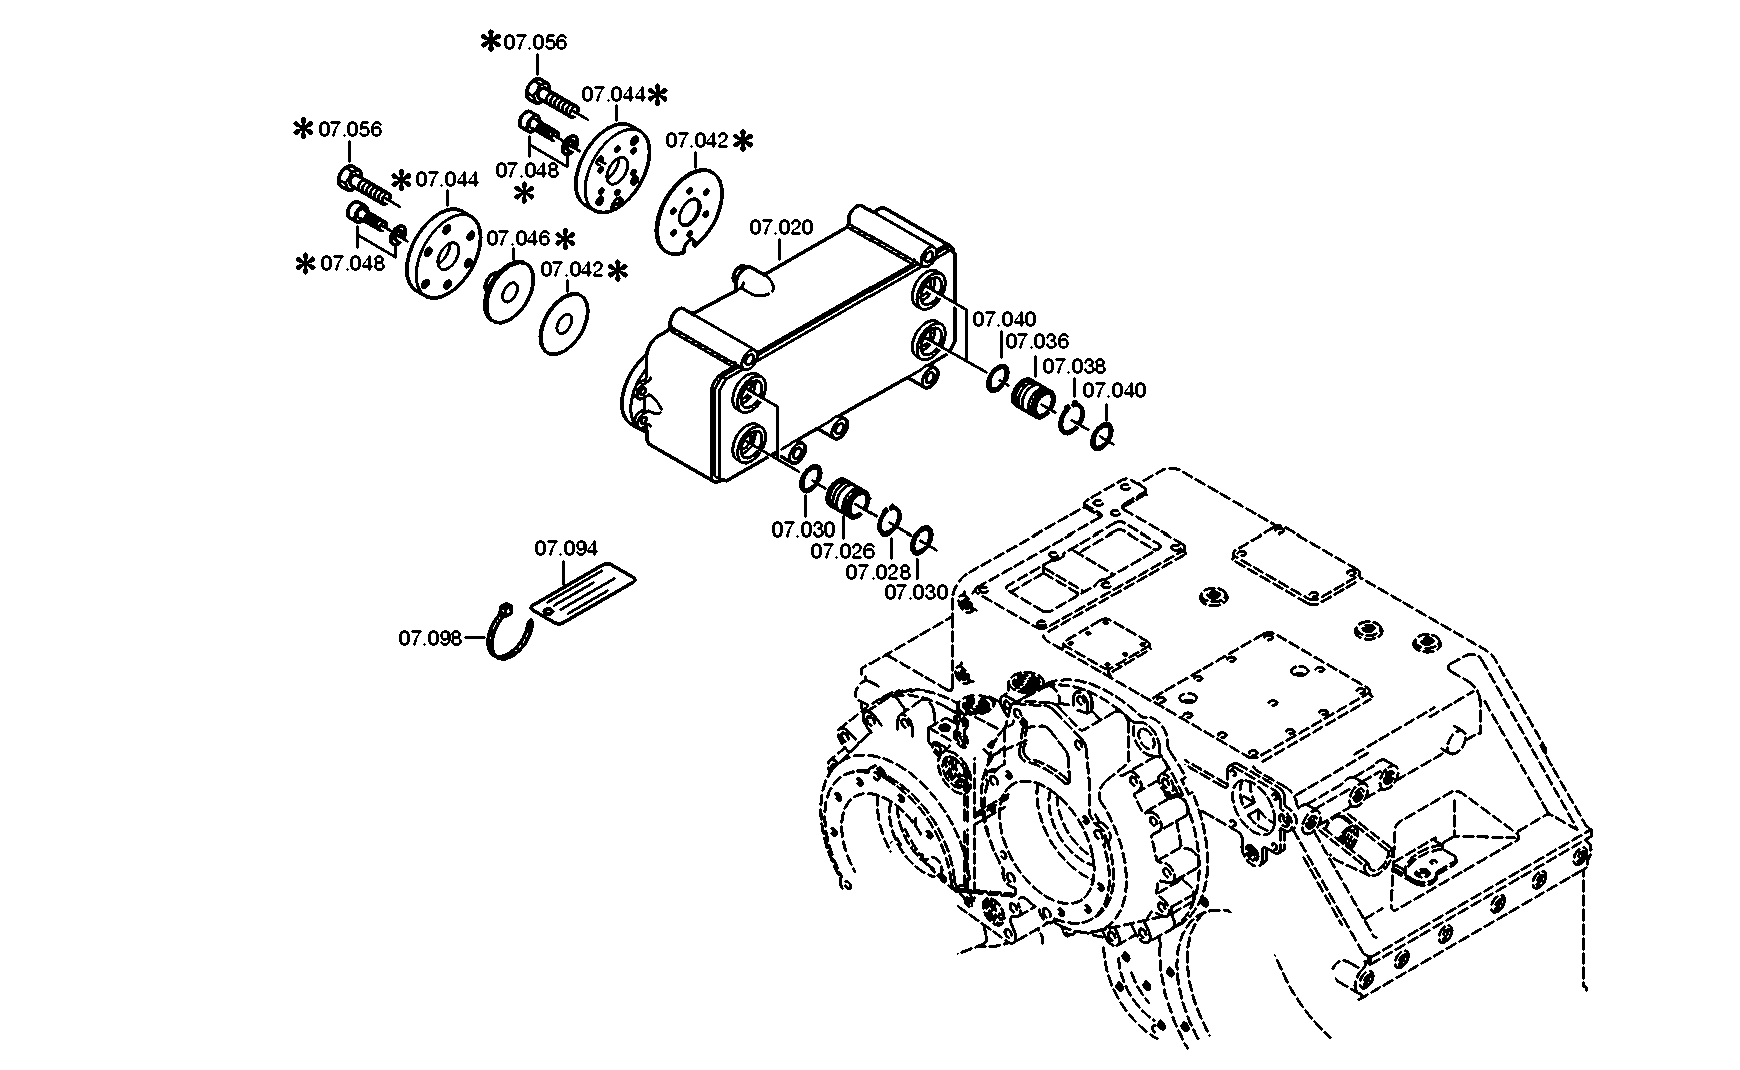 drawing for NISSAN MOTOR CO. 07902517-0 - SPRING WASHER (figure 1)